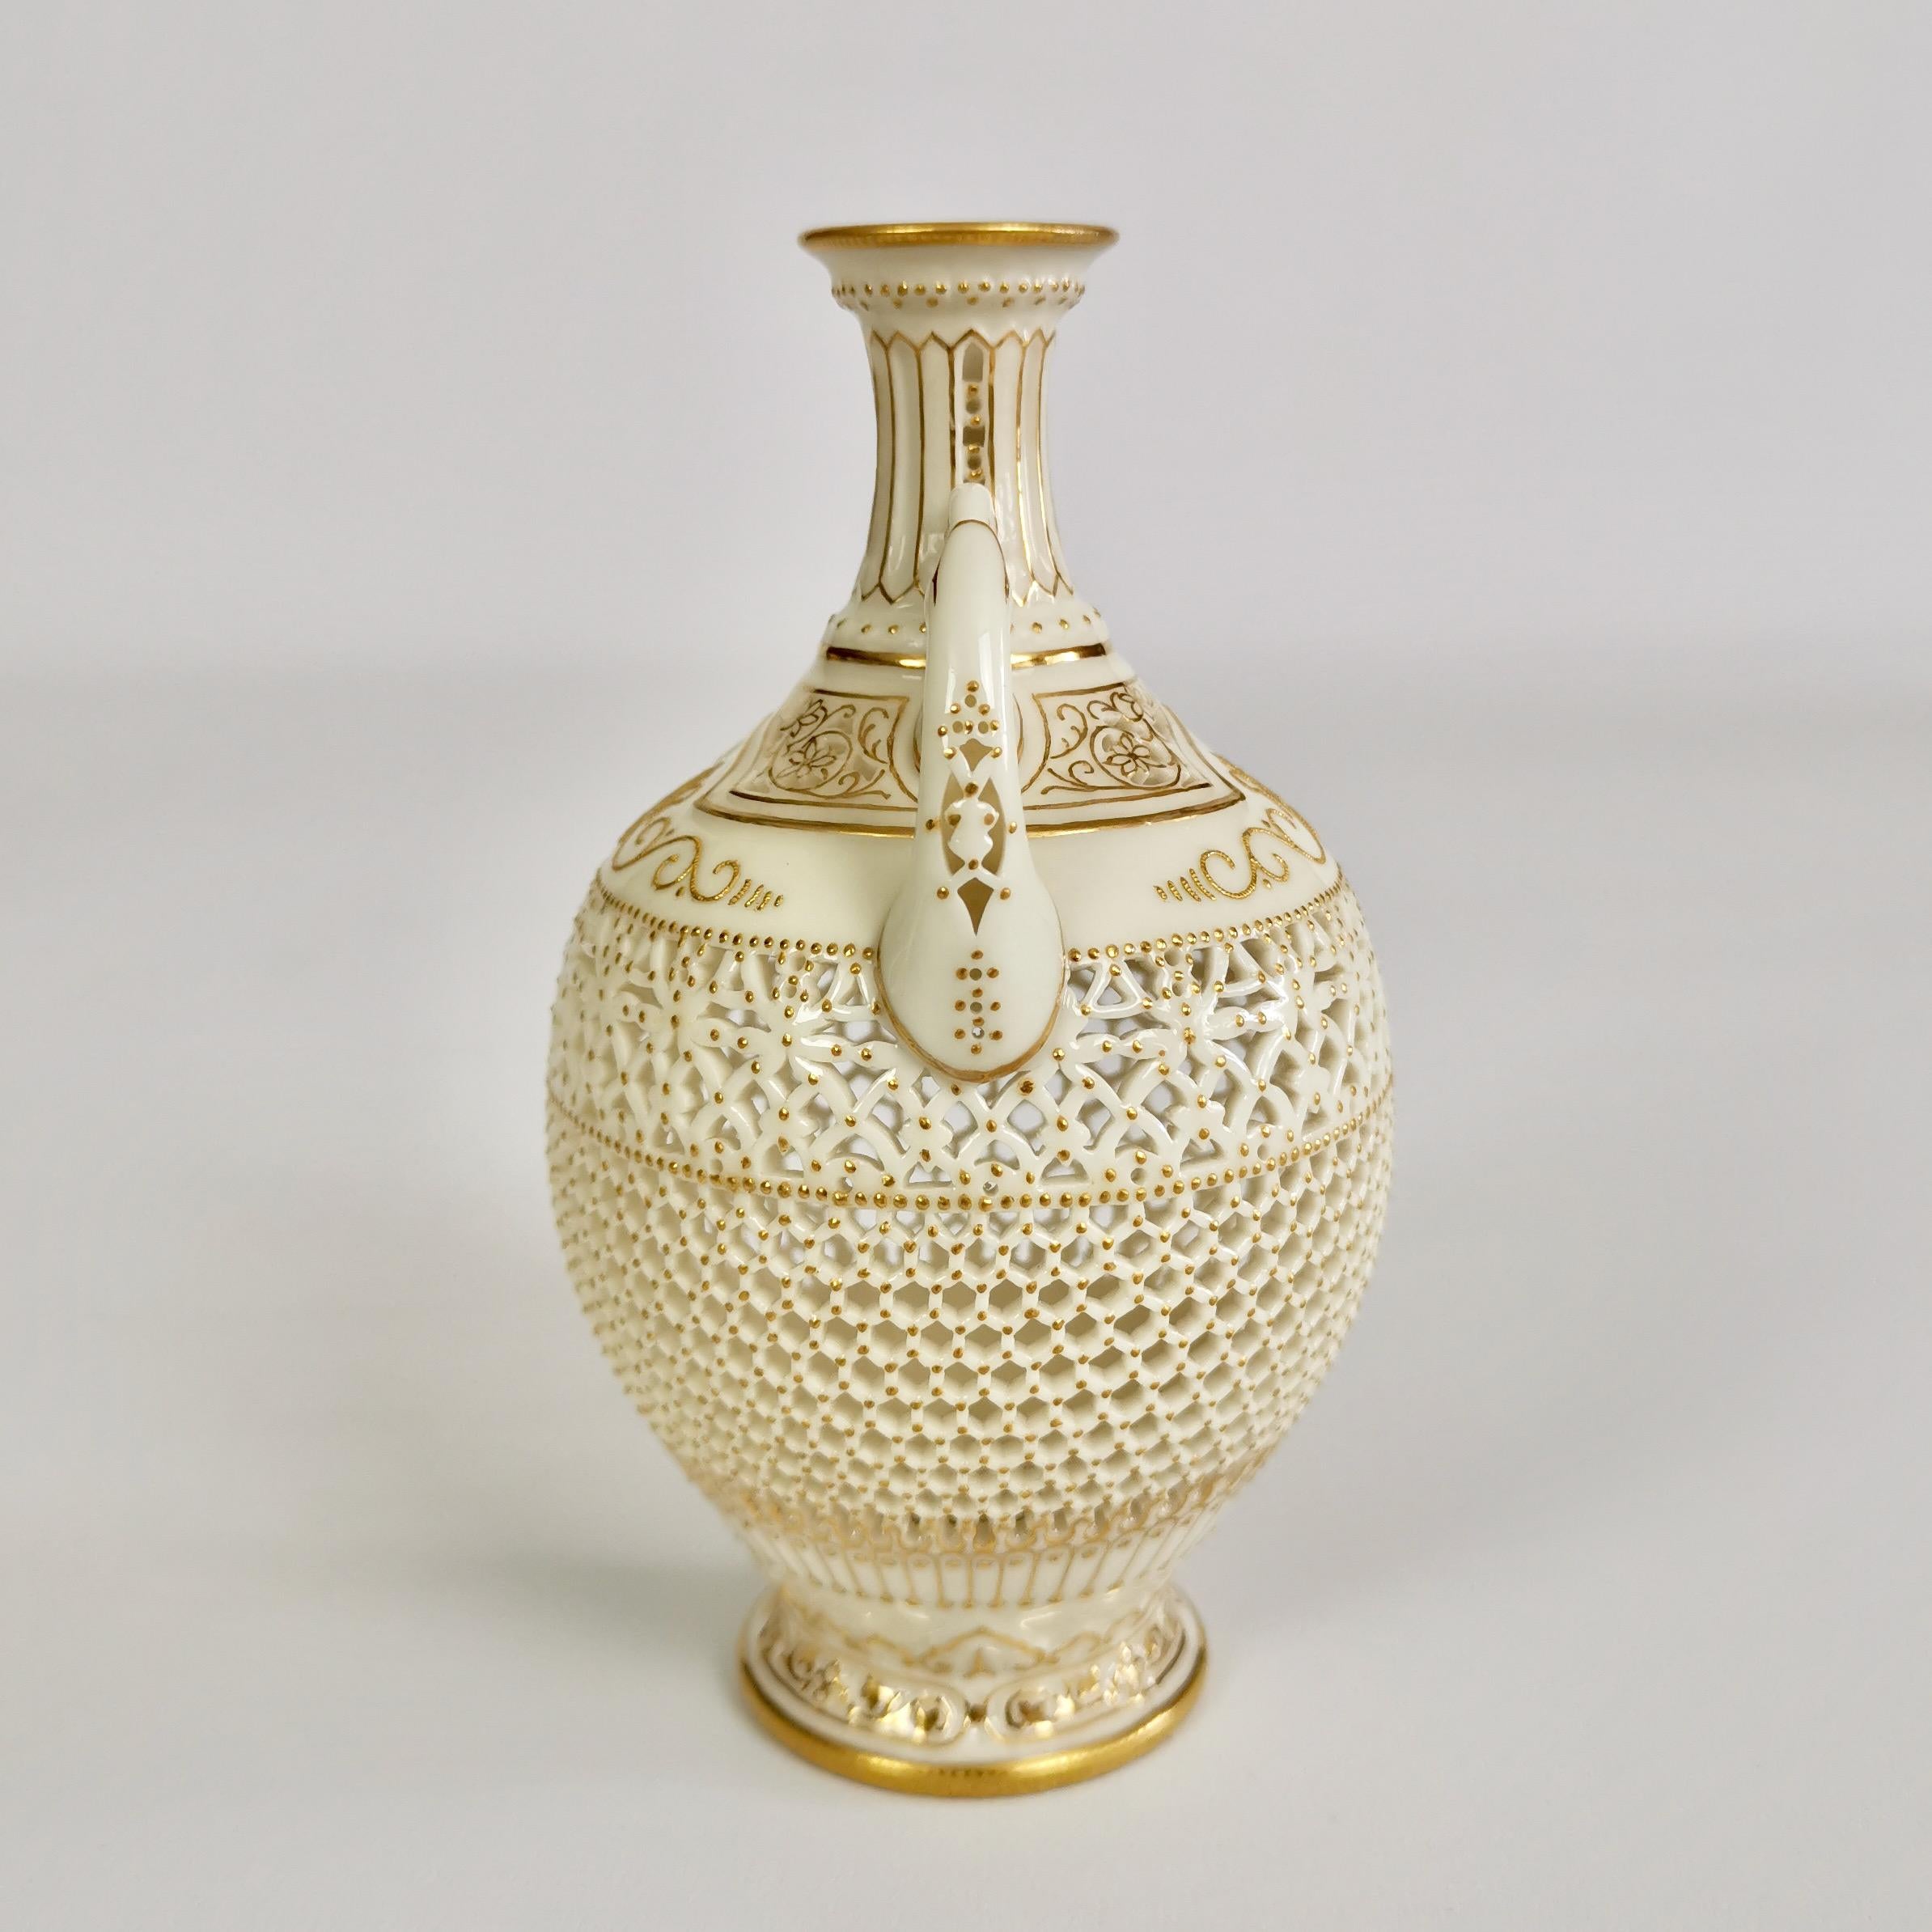 This is an important and sublimely made little vase created by George Owen at Royal Worcester in the year 1917. The vase is in the Persian style and is delicately reticulated (pierced) with very fine raised gilt patterns.

The original Worcester